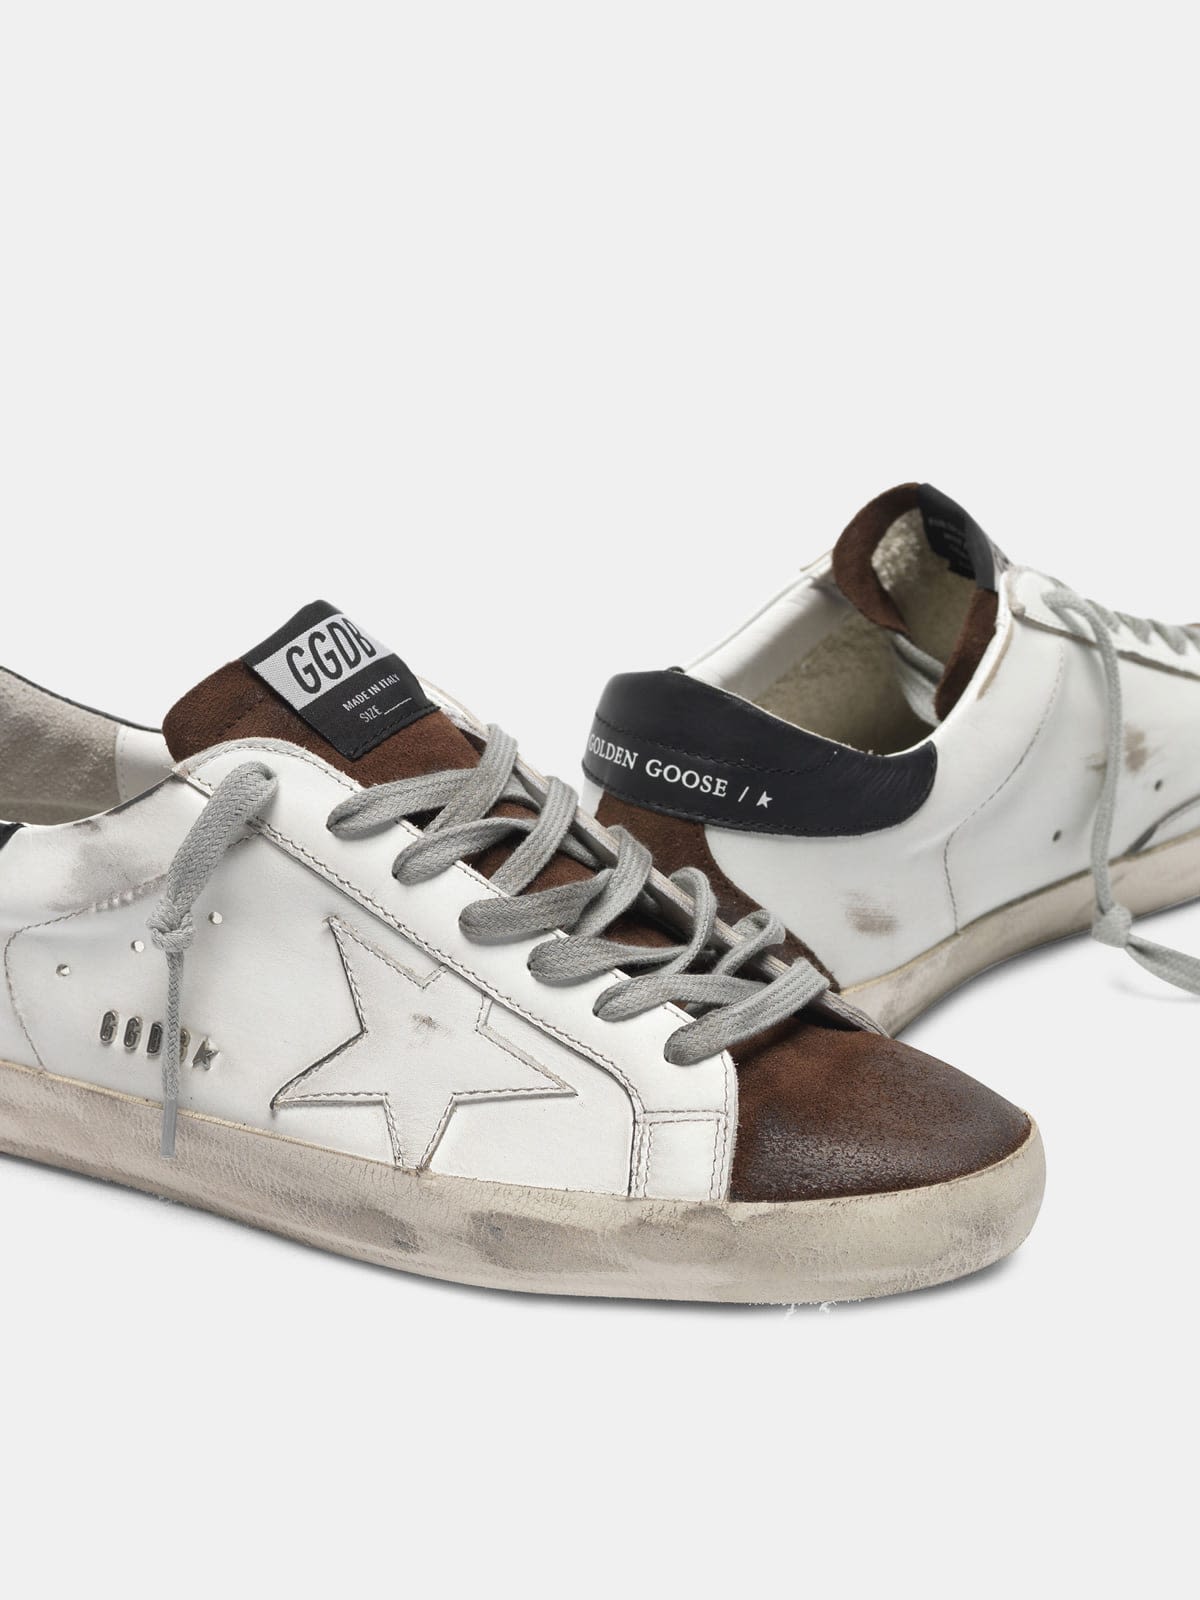 Two-tone white and brown Super-Star sneakers